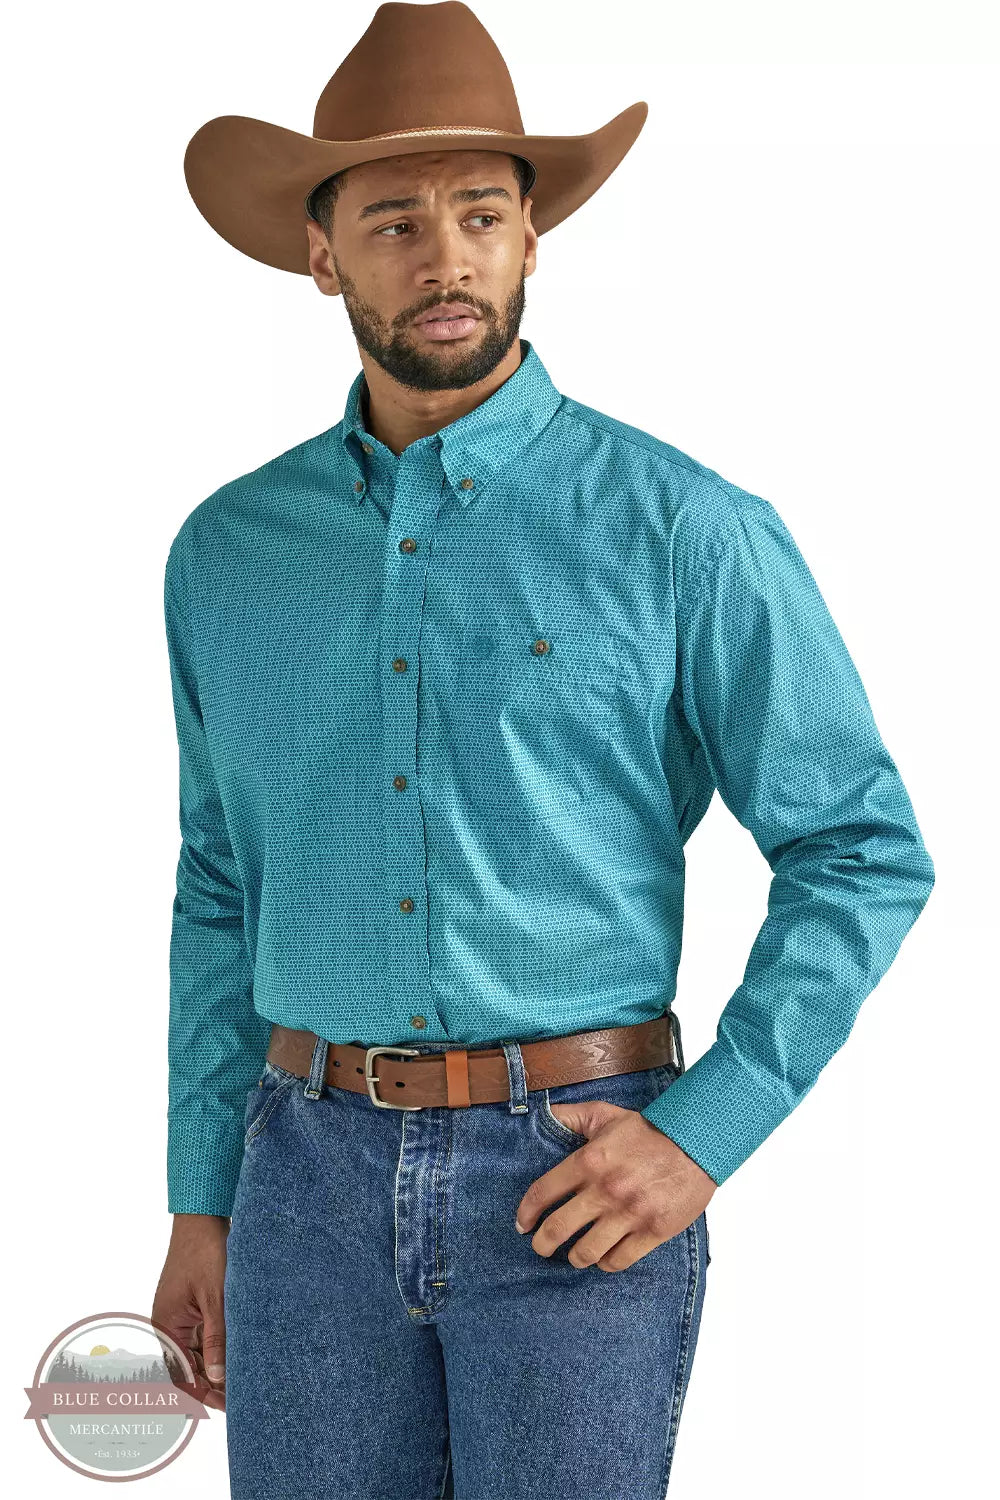 Wrangler 112338088 George Strait Long Sleeve One Pocket Button Down Shirt in Teal Discs Front View